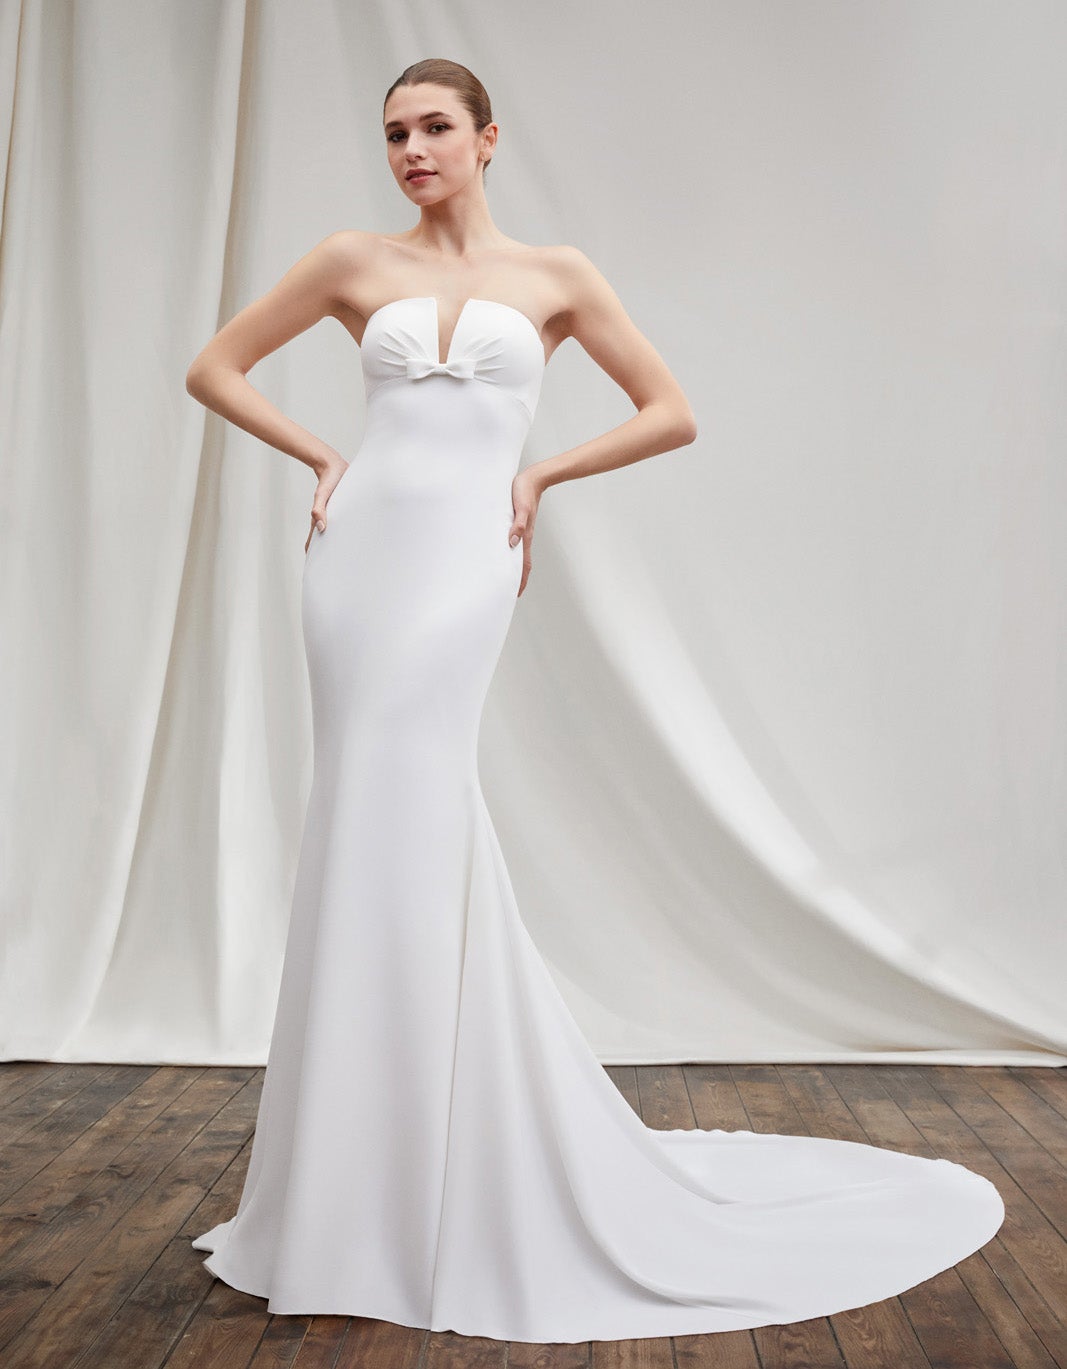 Modern Elegant Strapless Fit And Flare Gown by Alberto Palatchi - Image 1